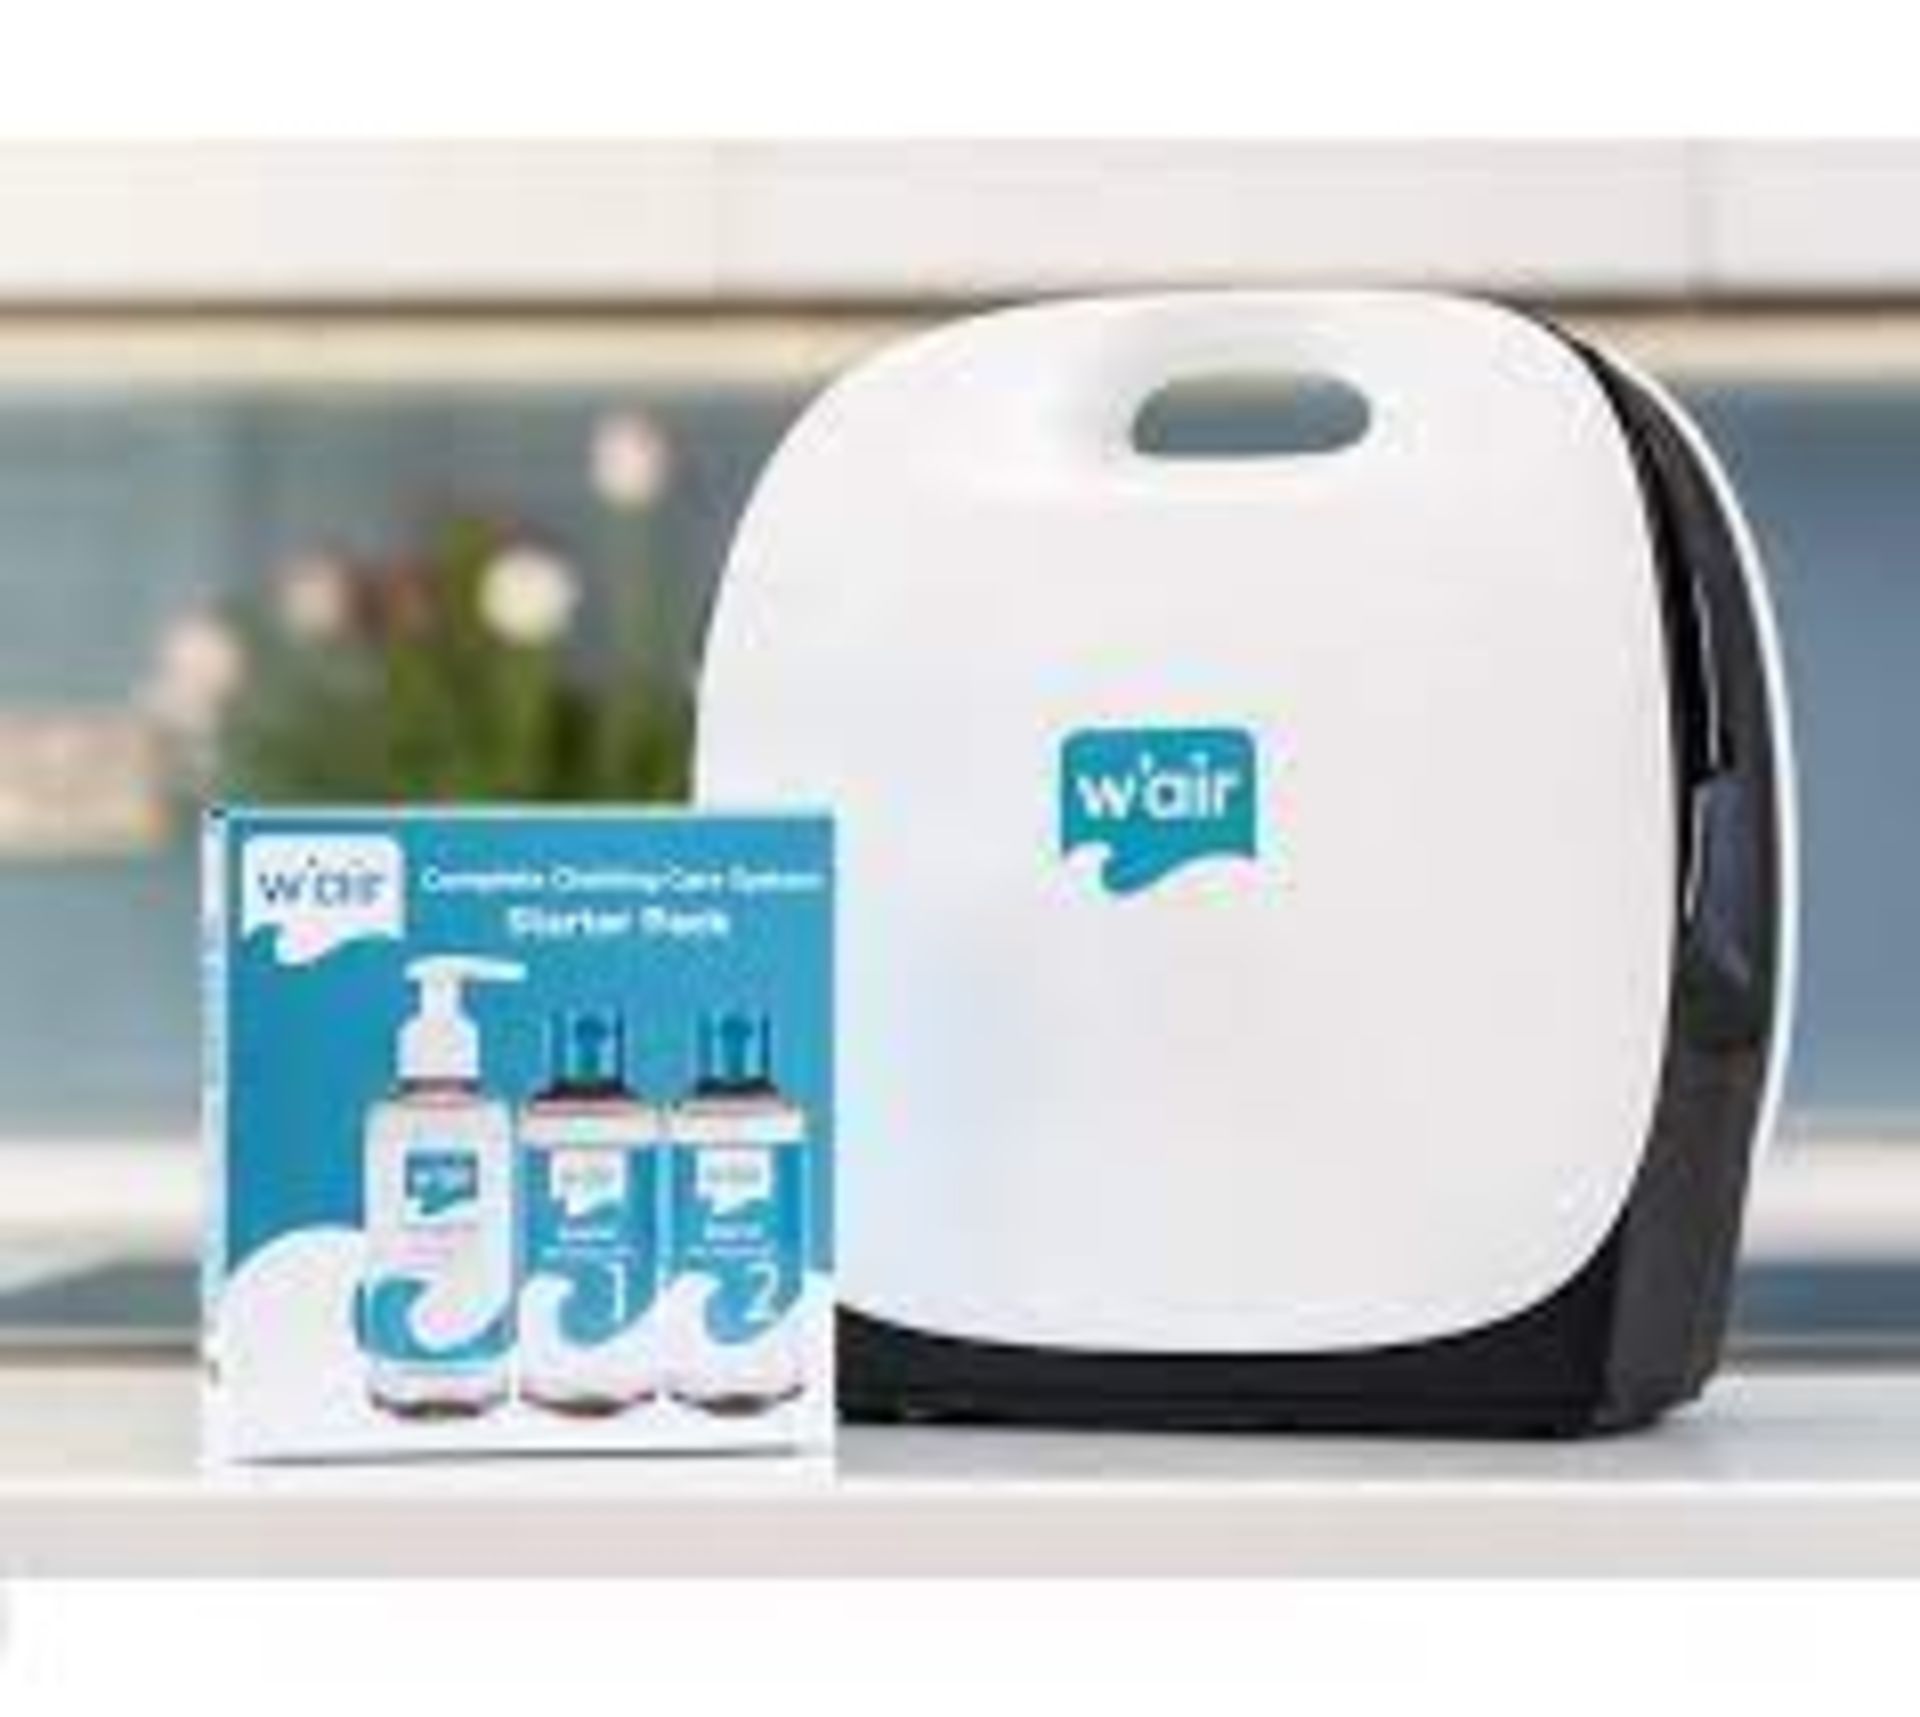 50 X BRAND NEW W'AIR SNEAKER CLEANING SYSTEMS RRP £299, The w'air uses hydrodynamic technology - Bild 5 aus 6